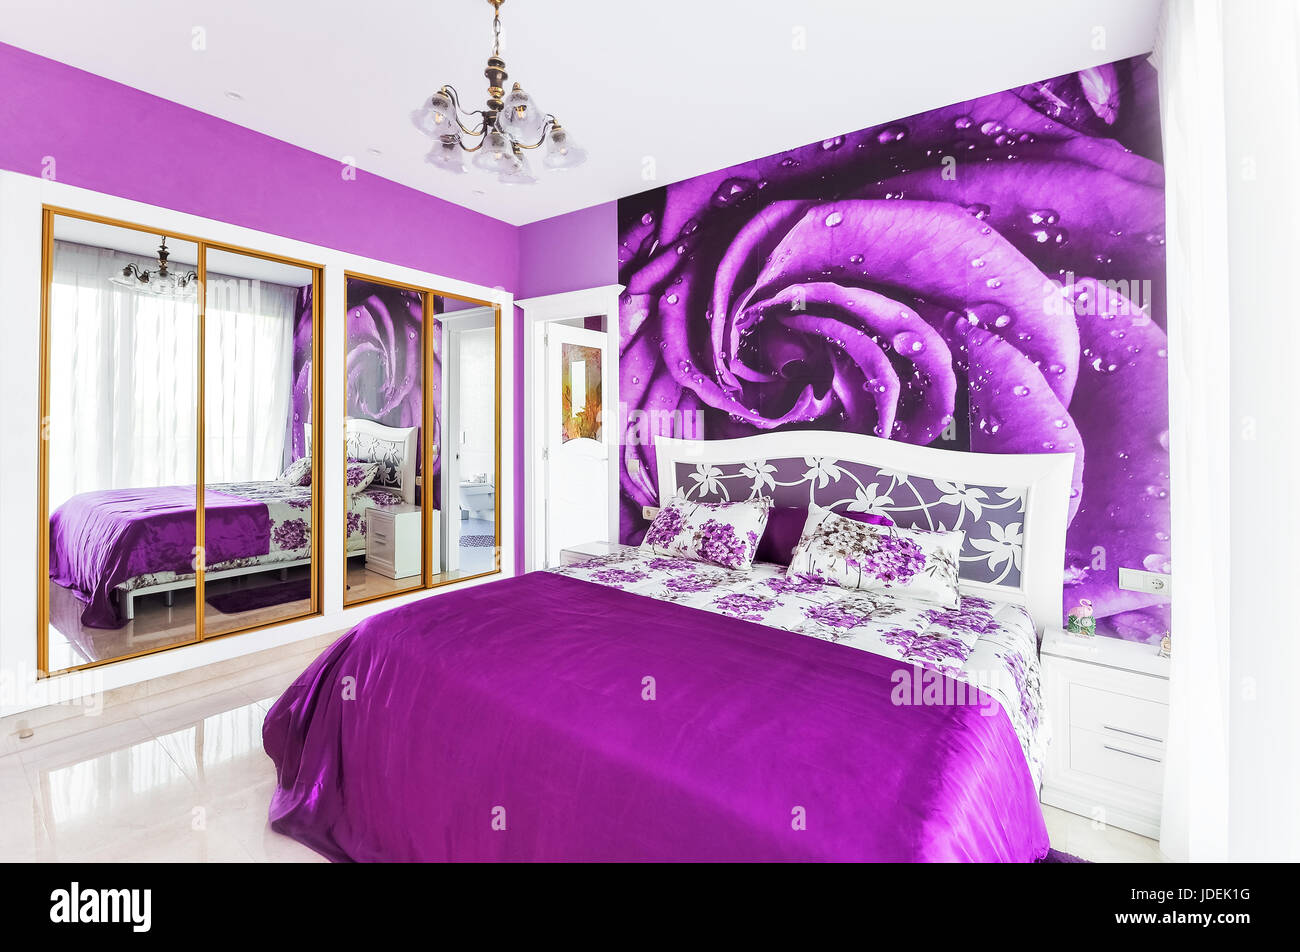 Interior of cozy bedroom in bright violet tones. Large mirrored wardrobe. Wall-papers on a wall. Stock Photo